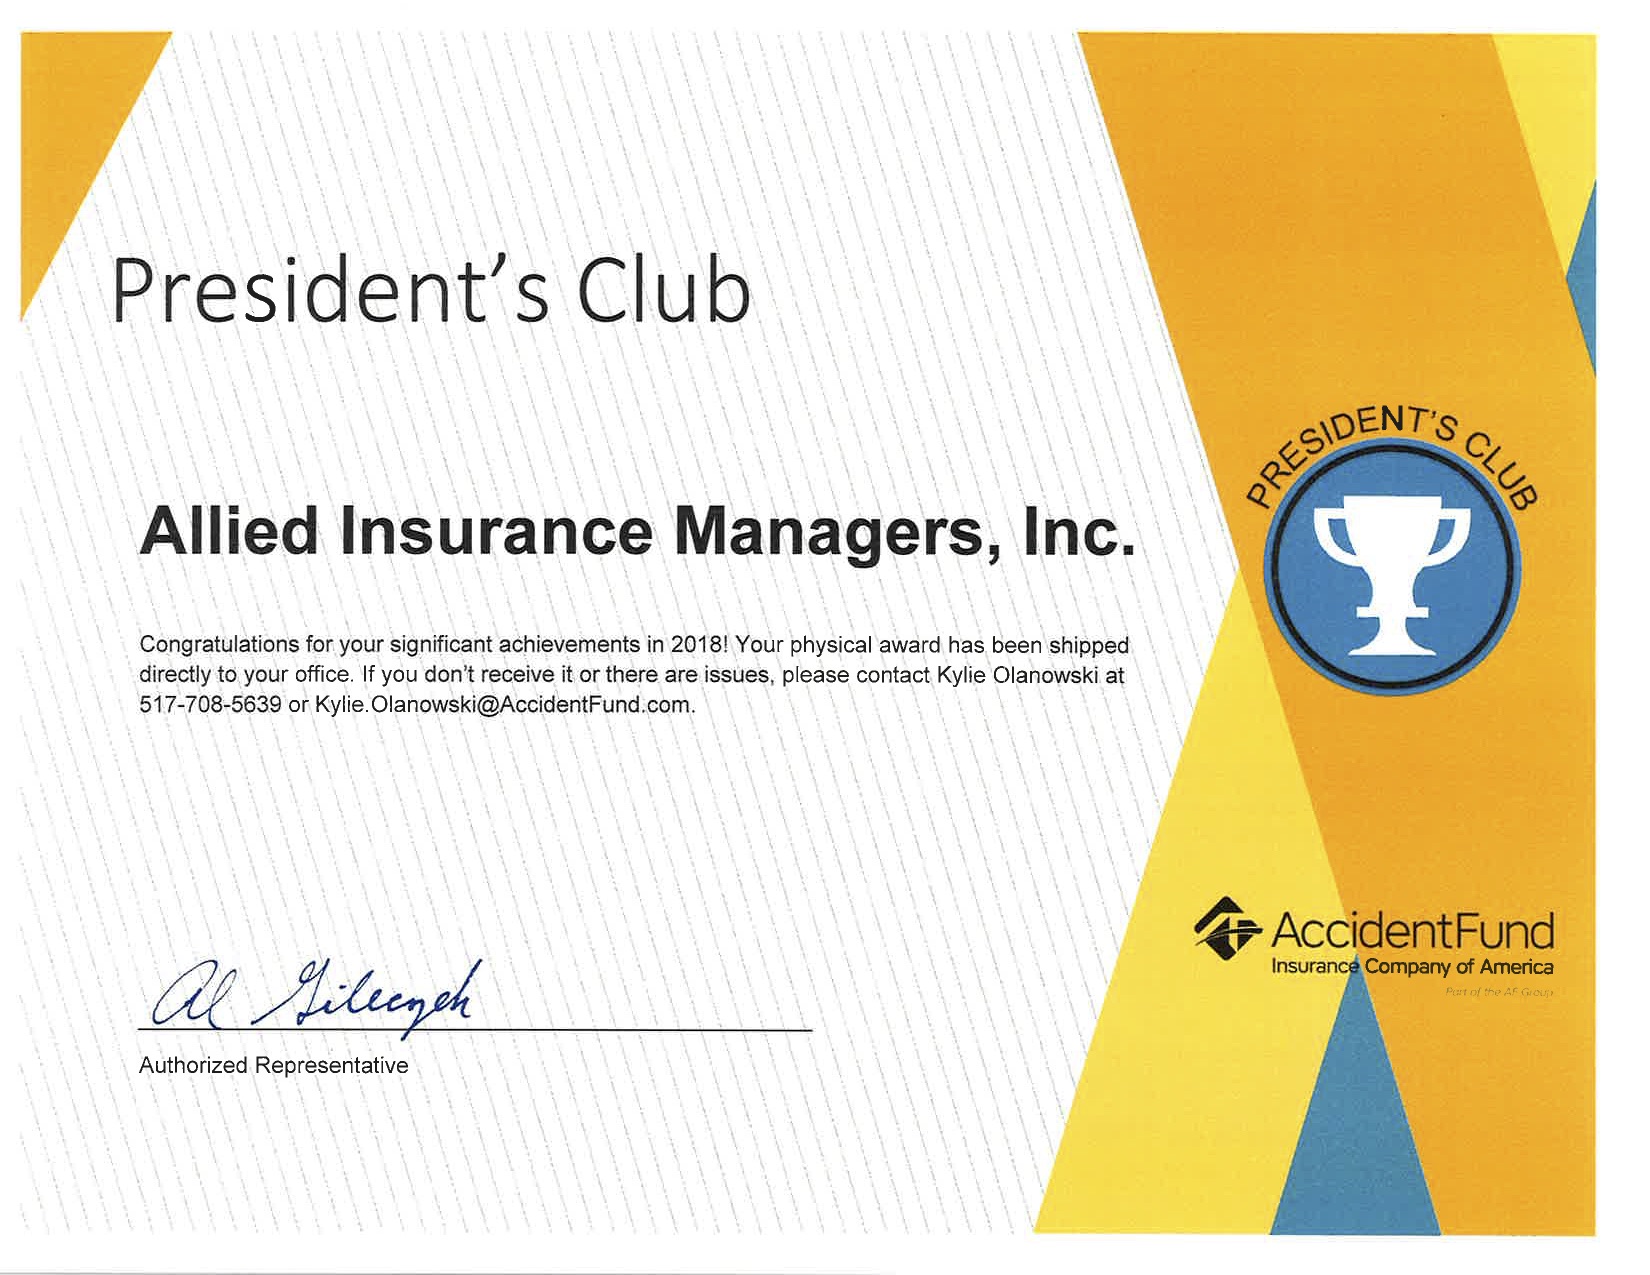 President's Club Allied Insurance Managers, Inc.